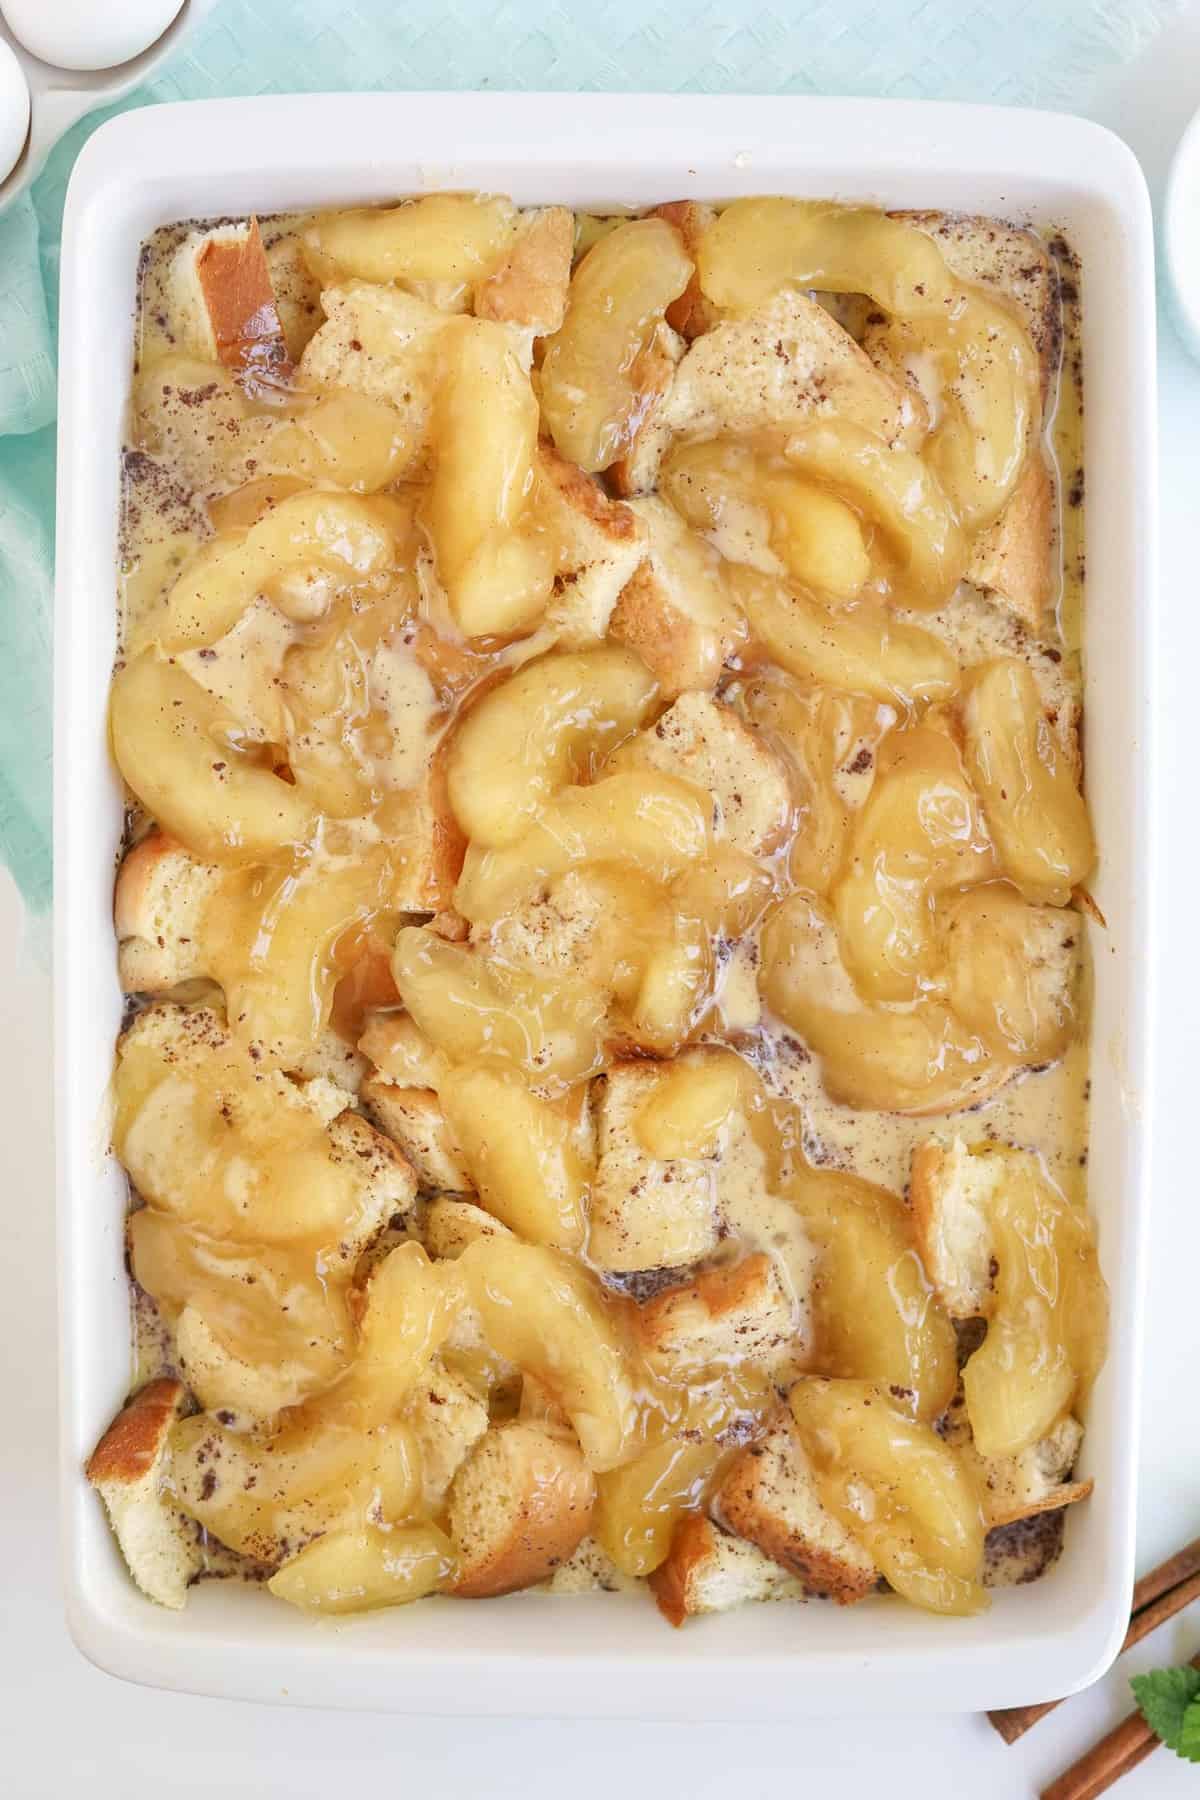  Baked french toast casserole.